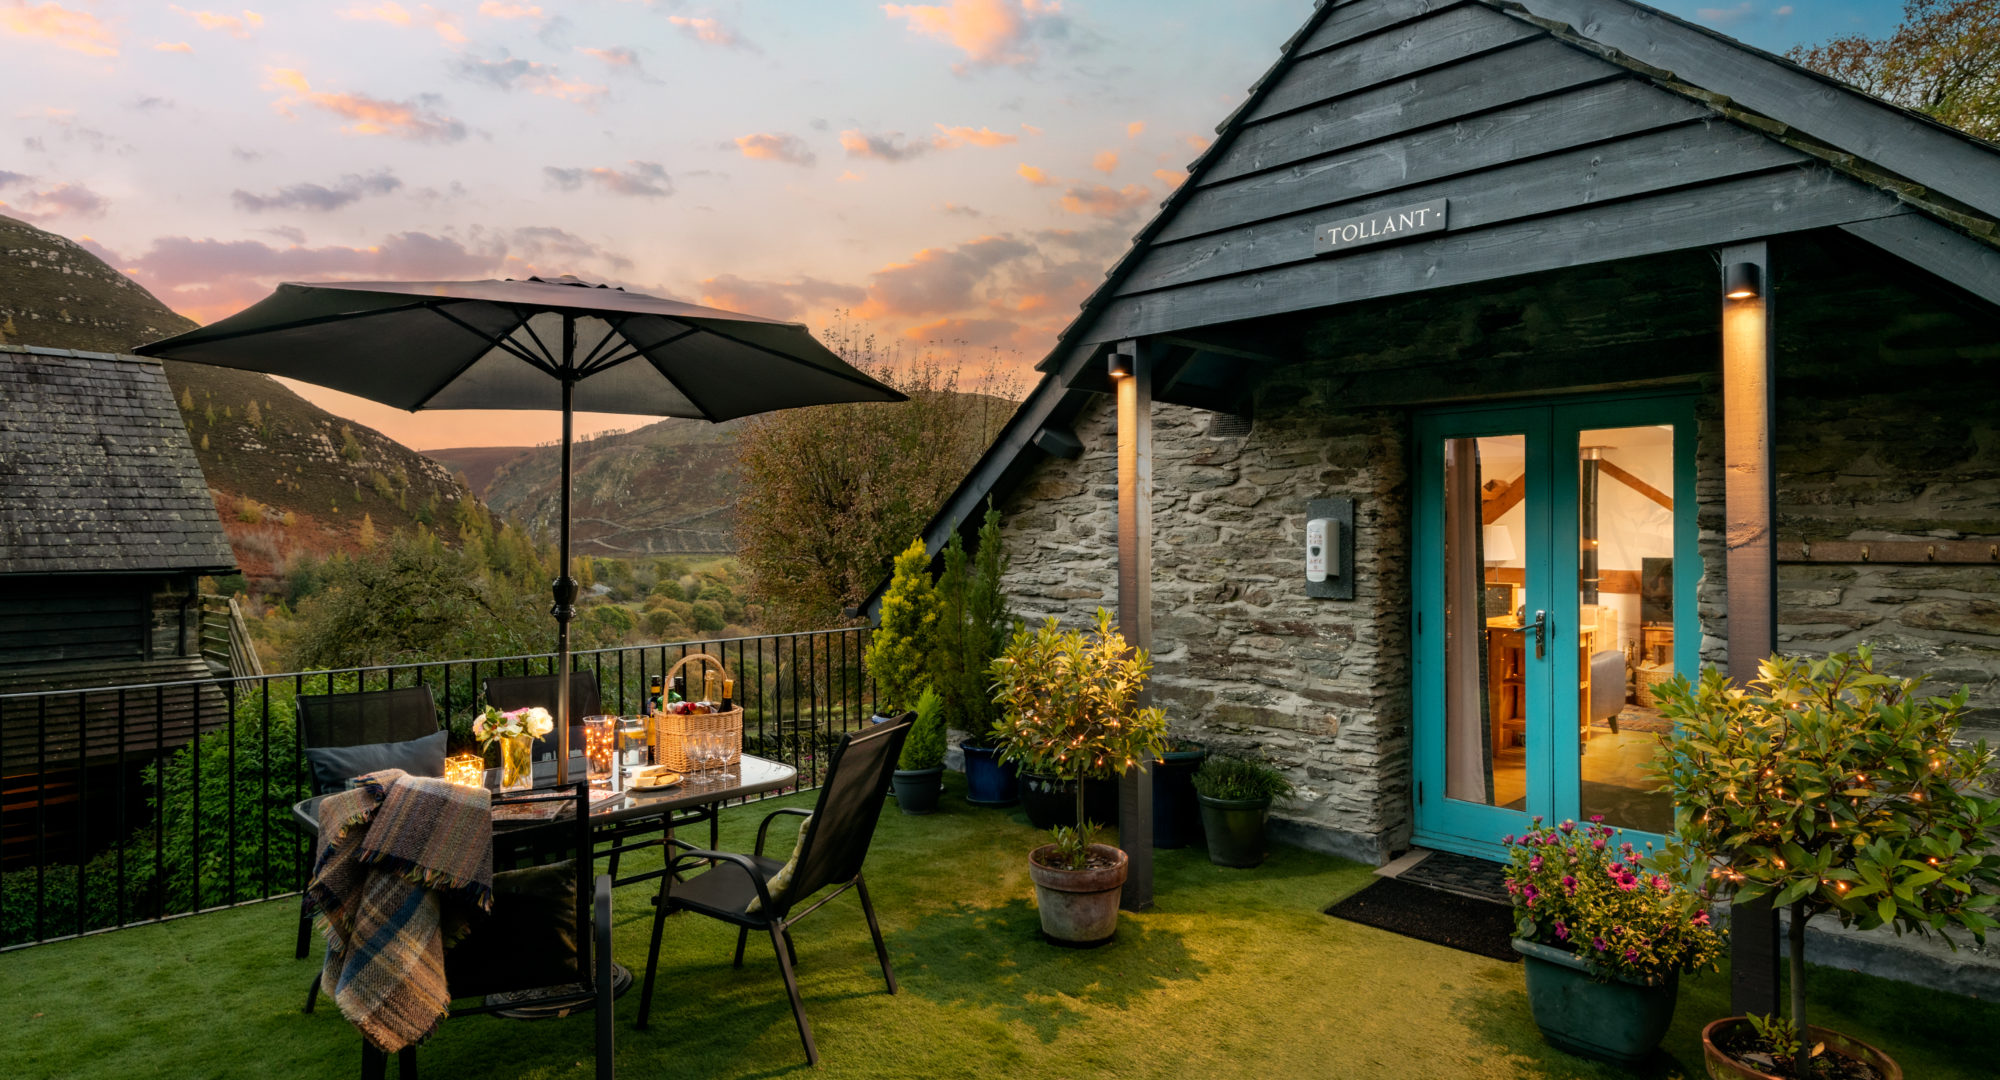 Outdoor seating for a Mid Wales holiday lodge cottage with hot tub